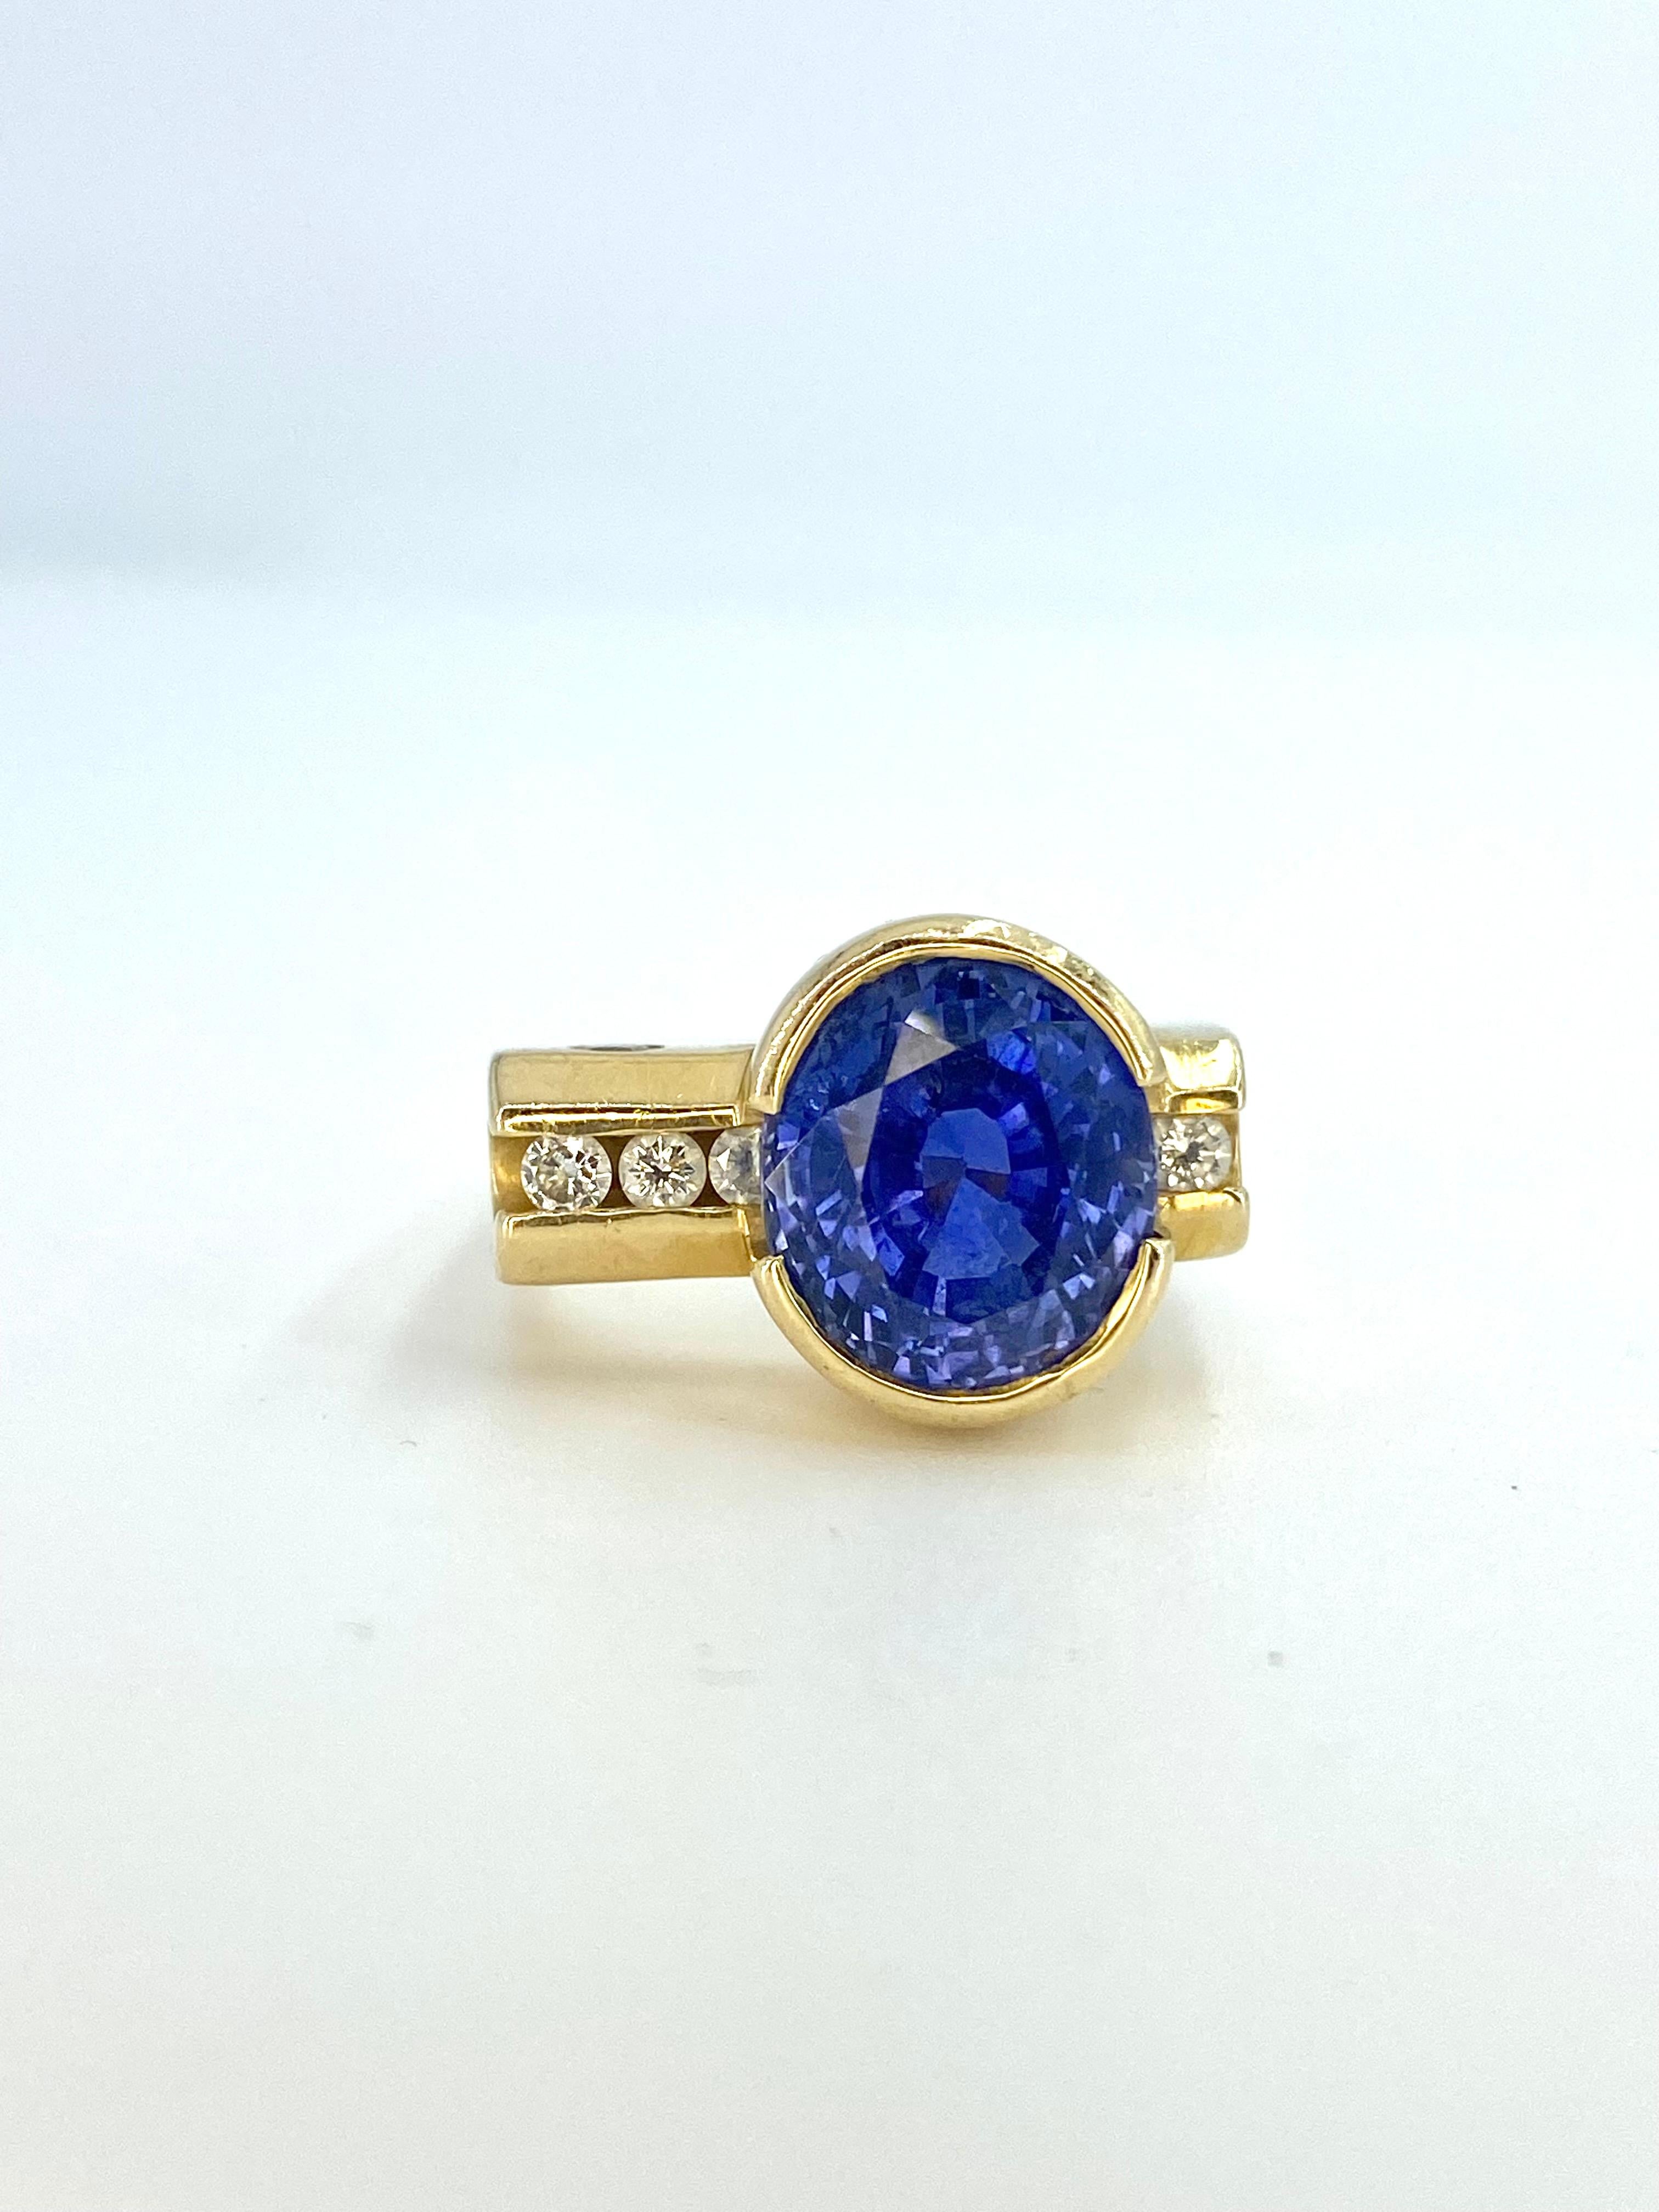 5 Carat Oval Cut Natural Blue Ceylon Sapphire Set in Platinum Ring In Good Condition For Sale In Miami, FL